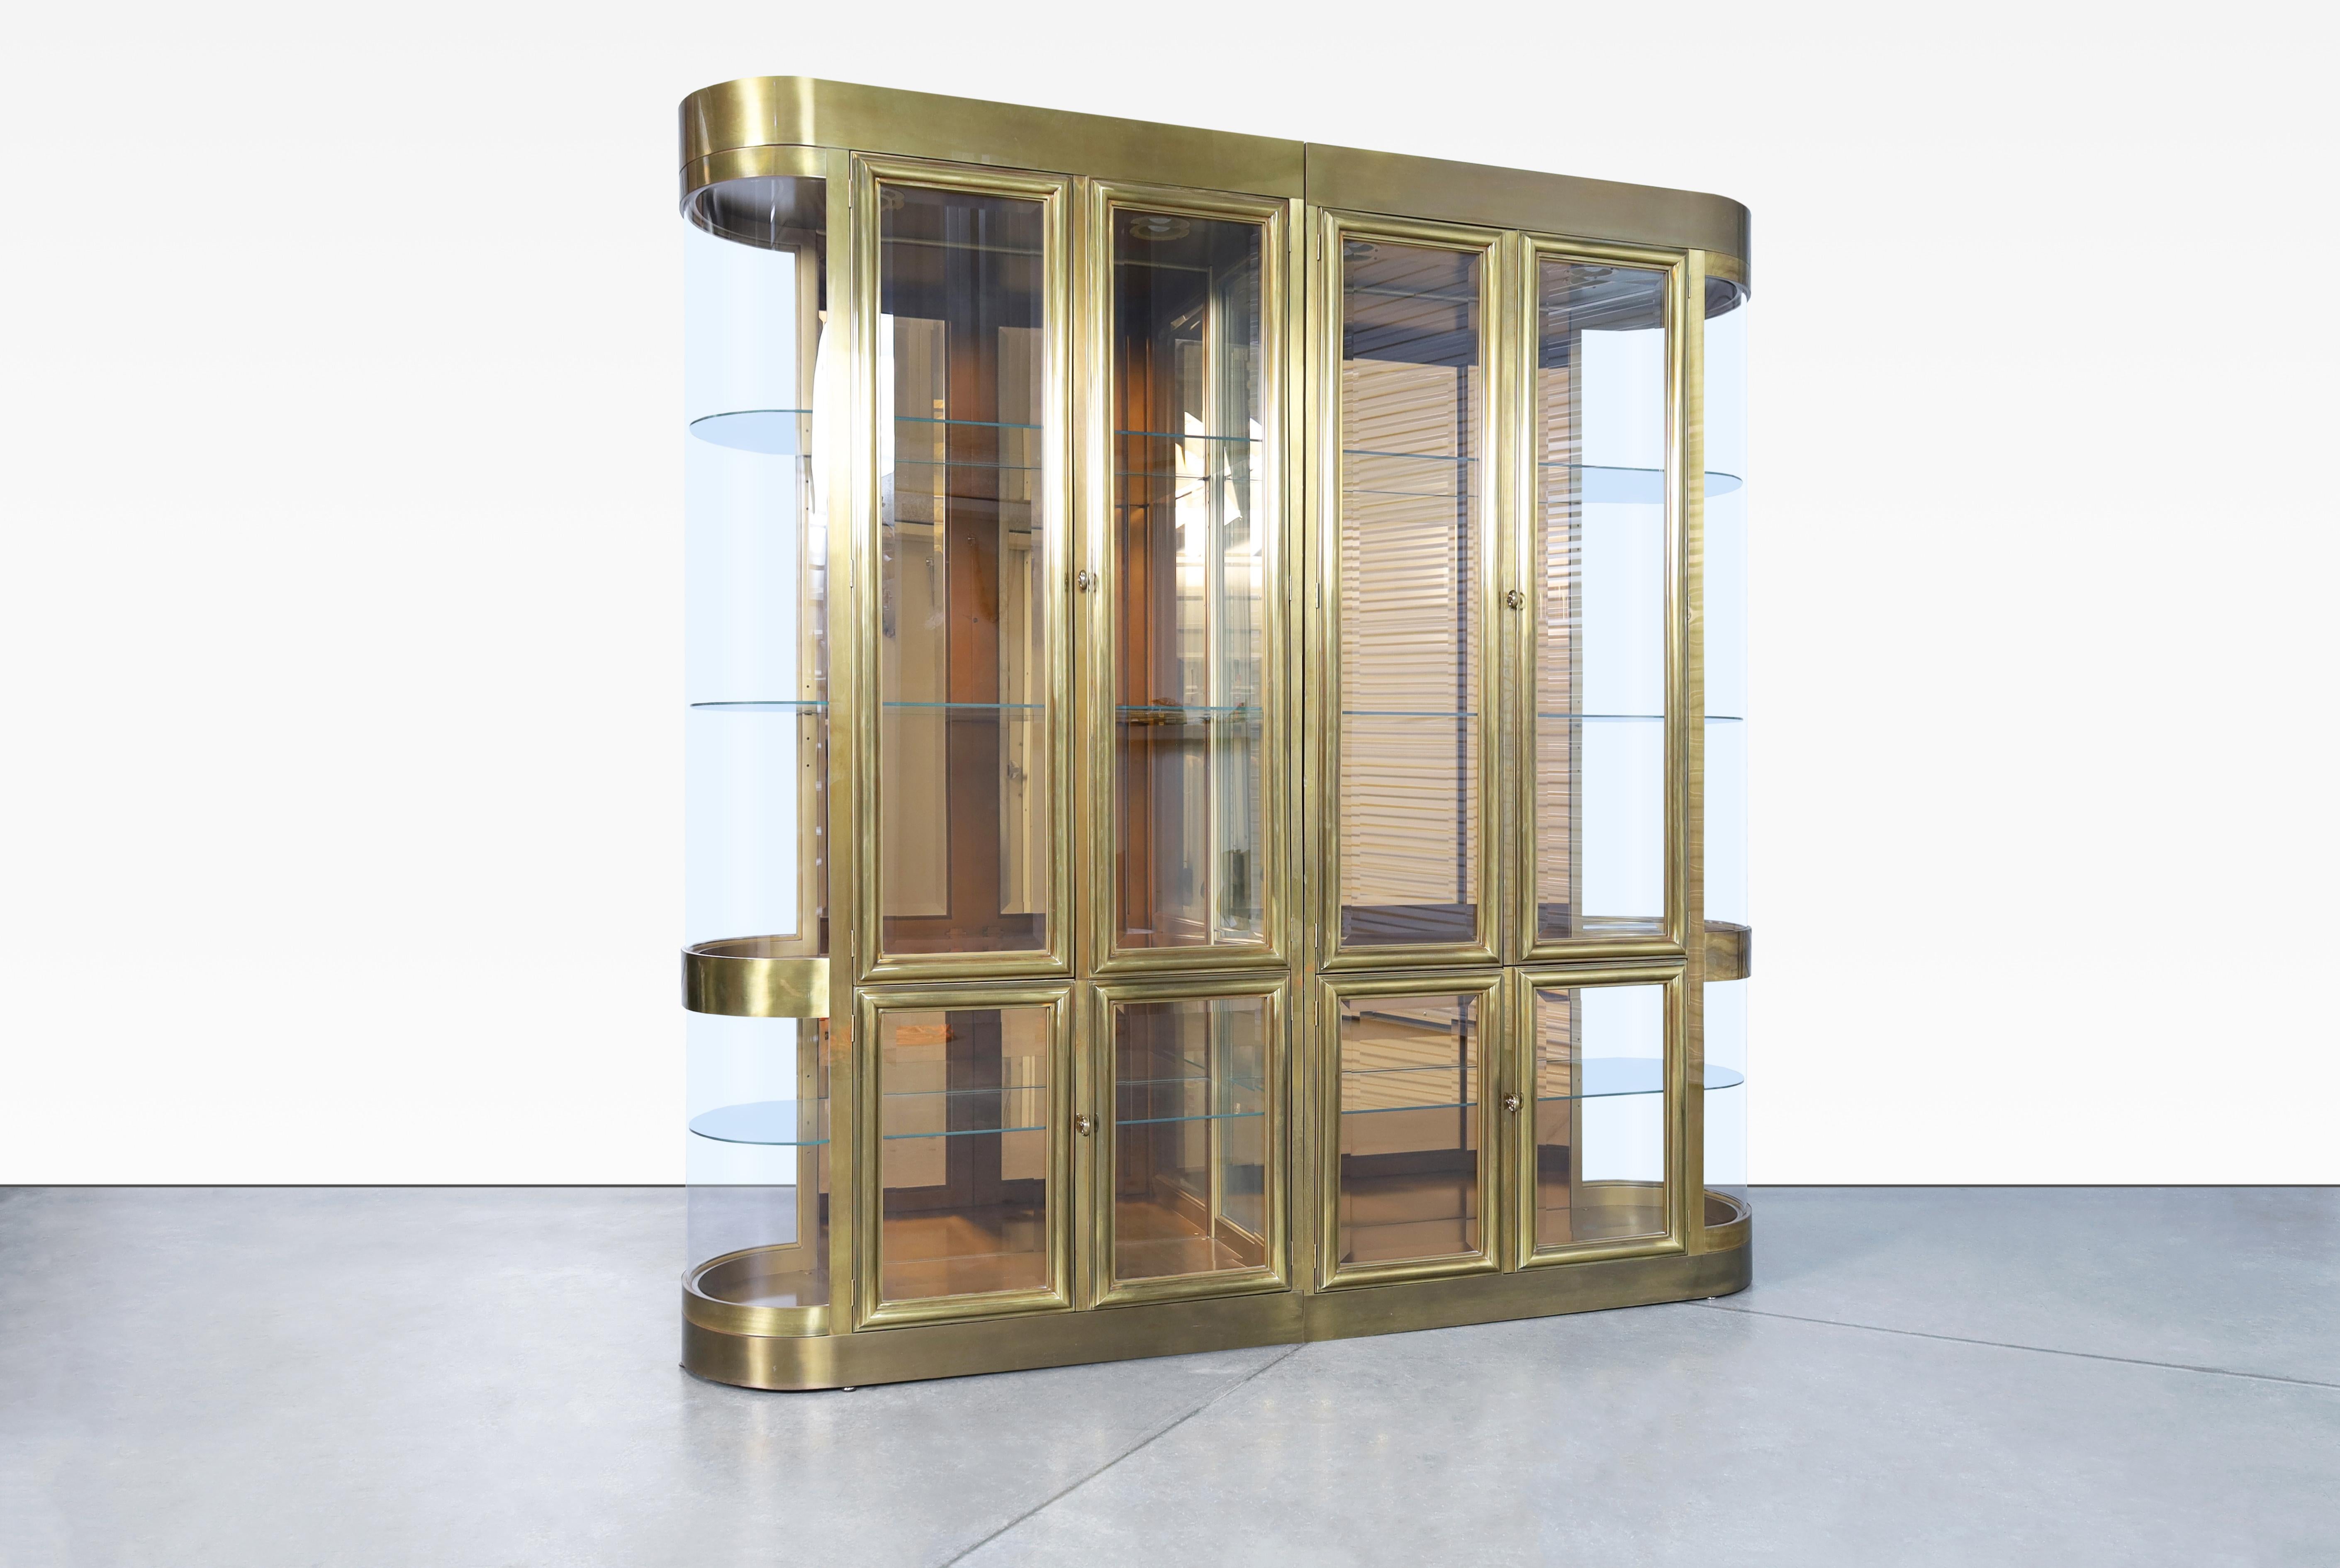 Beautiful, one-of-a-kind brass display cabinets designed by Mastercraft in the United States, circa 1970's. This stunning two-part set of handcrafted brass display cabinets invites elegance into any space. It's all in the details - large-scale and